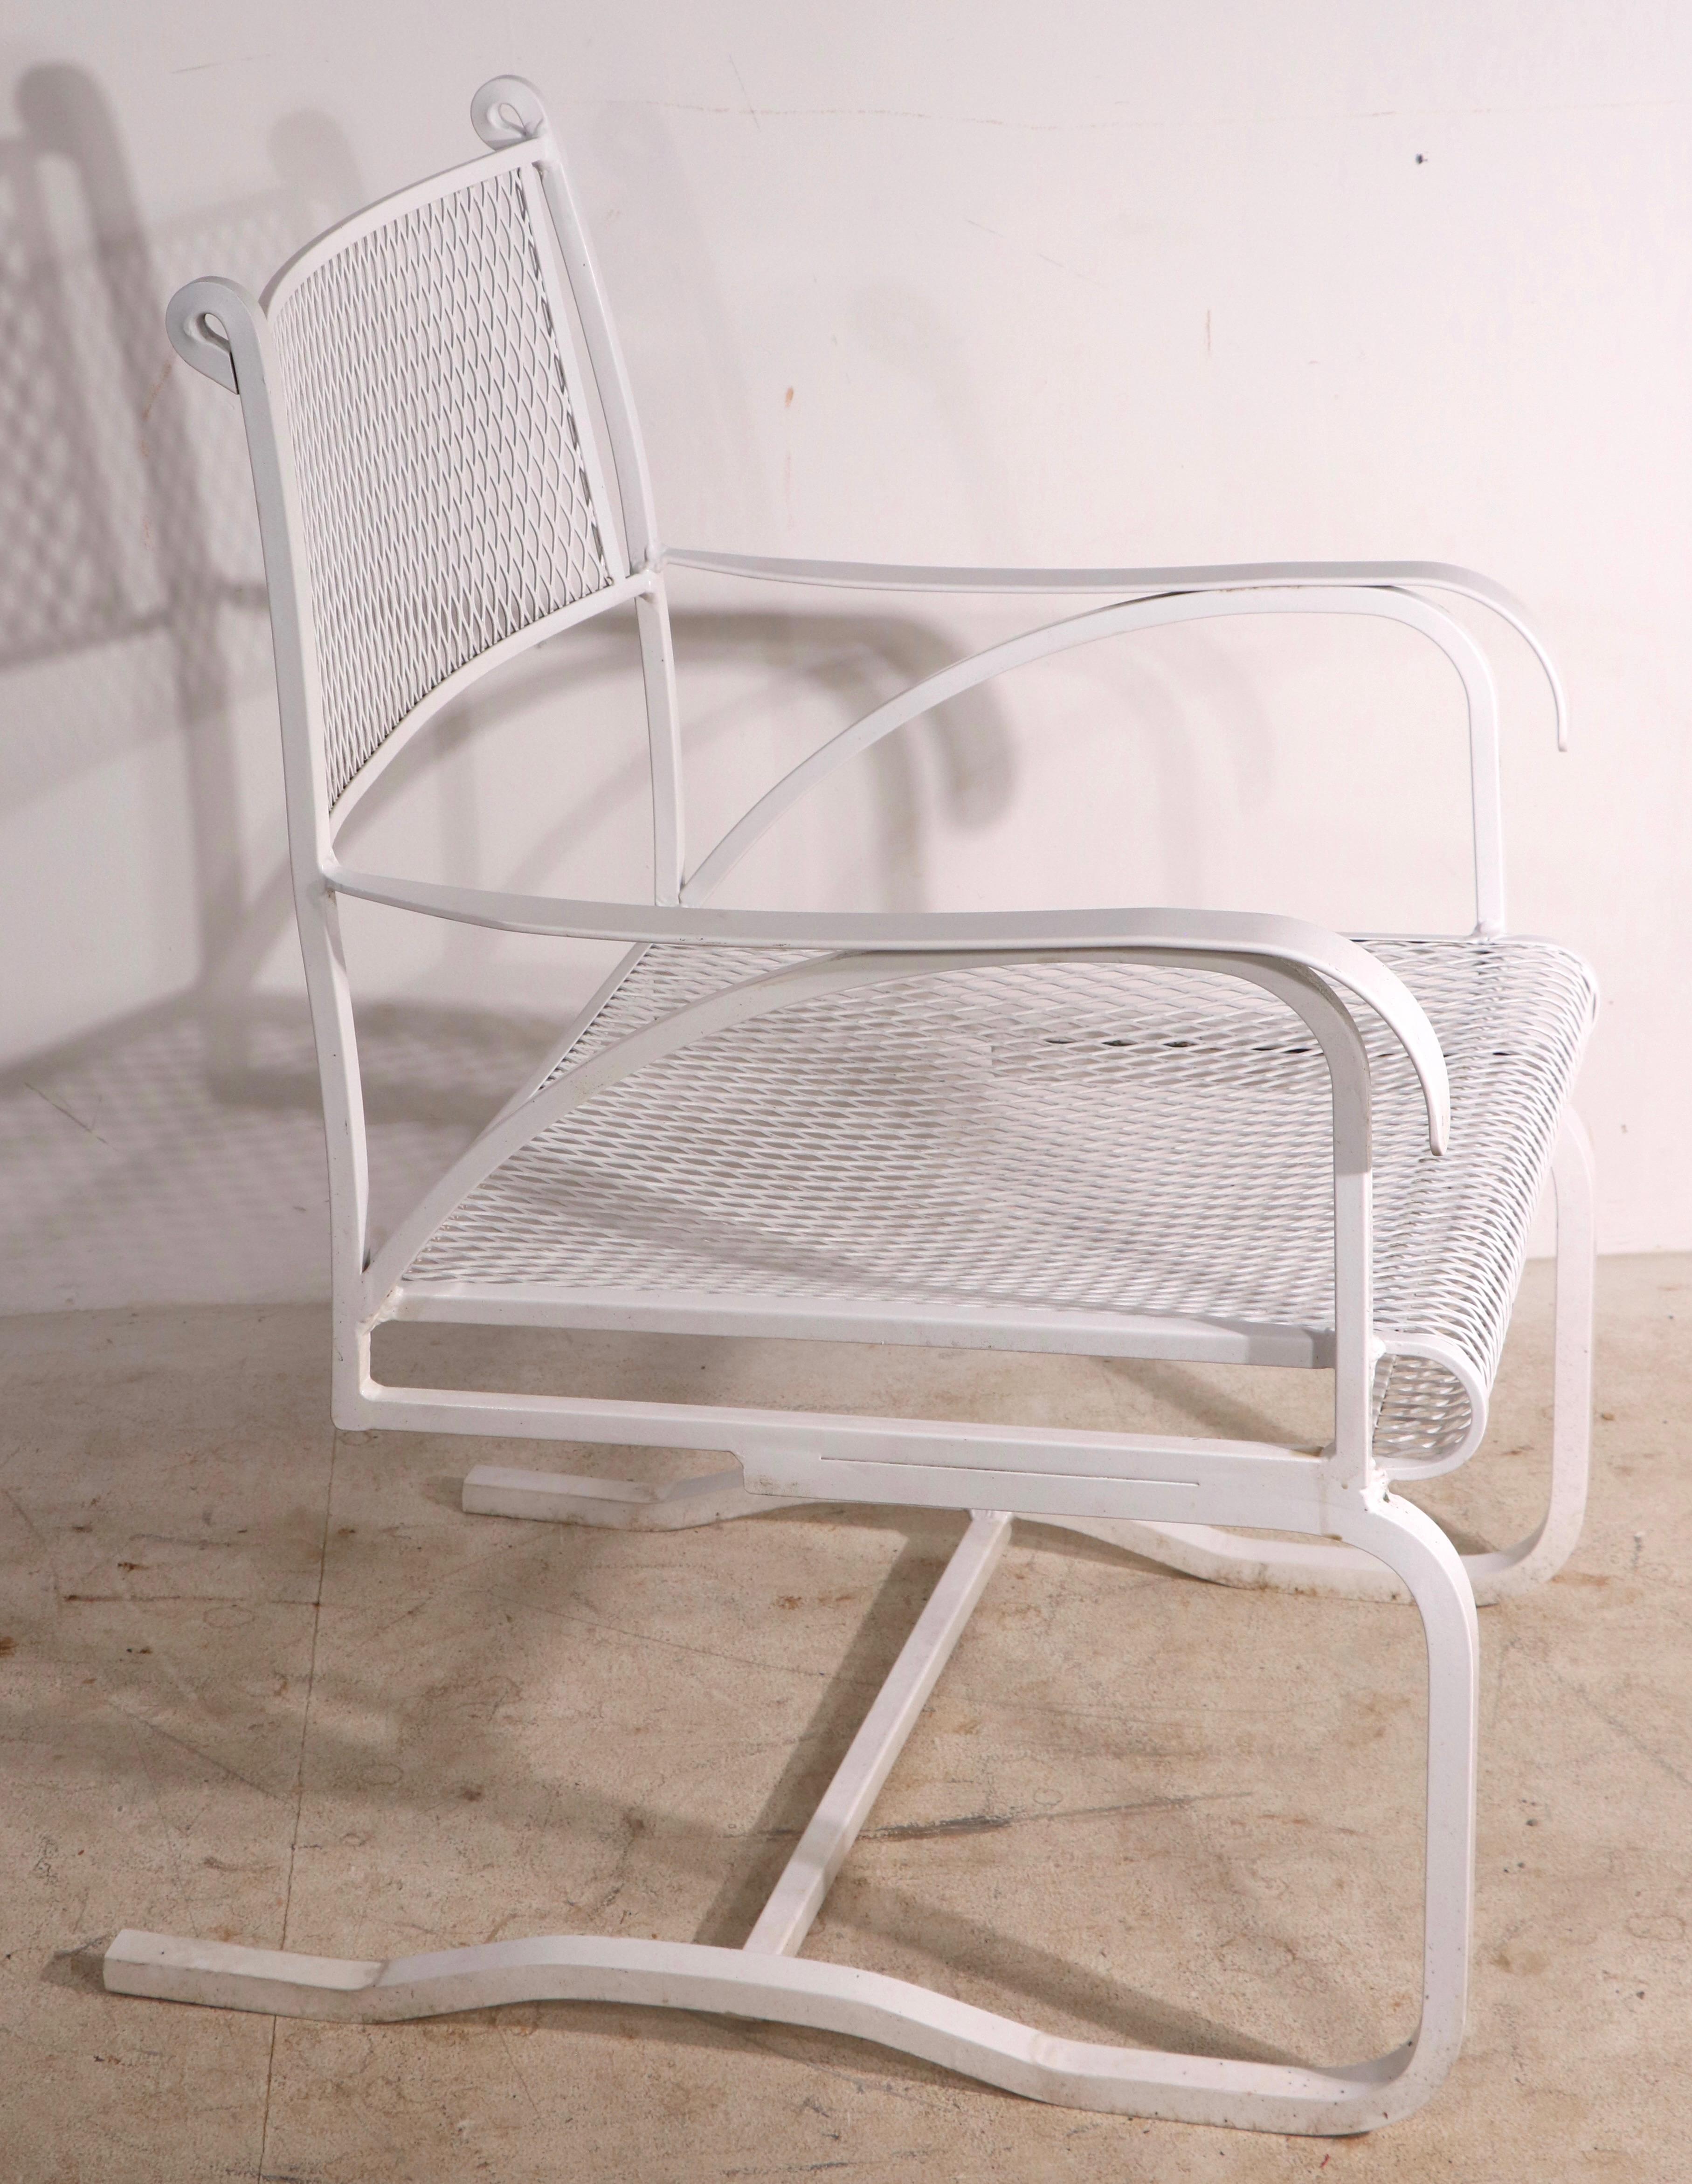 Chic architectural cantilevered dining height arm chair, having a squared stock metal frame, and a metal mesh seat and back. Manufacture attributed to Woodard, this example is unsigned. Usable as is, we also offer custom powder coating if you prefer